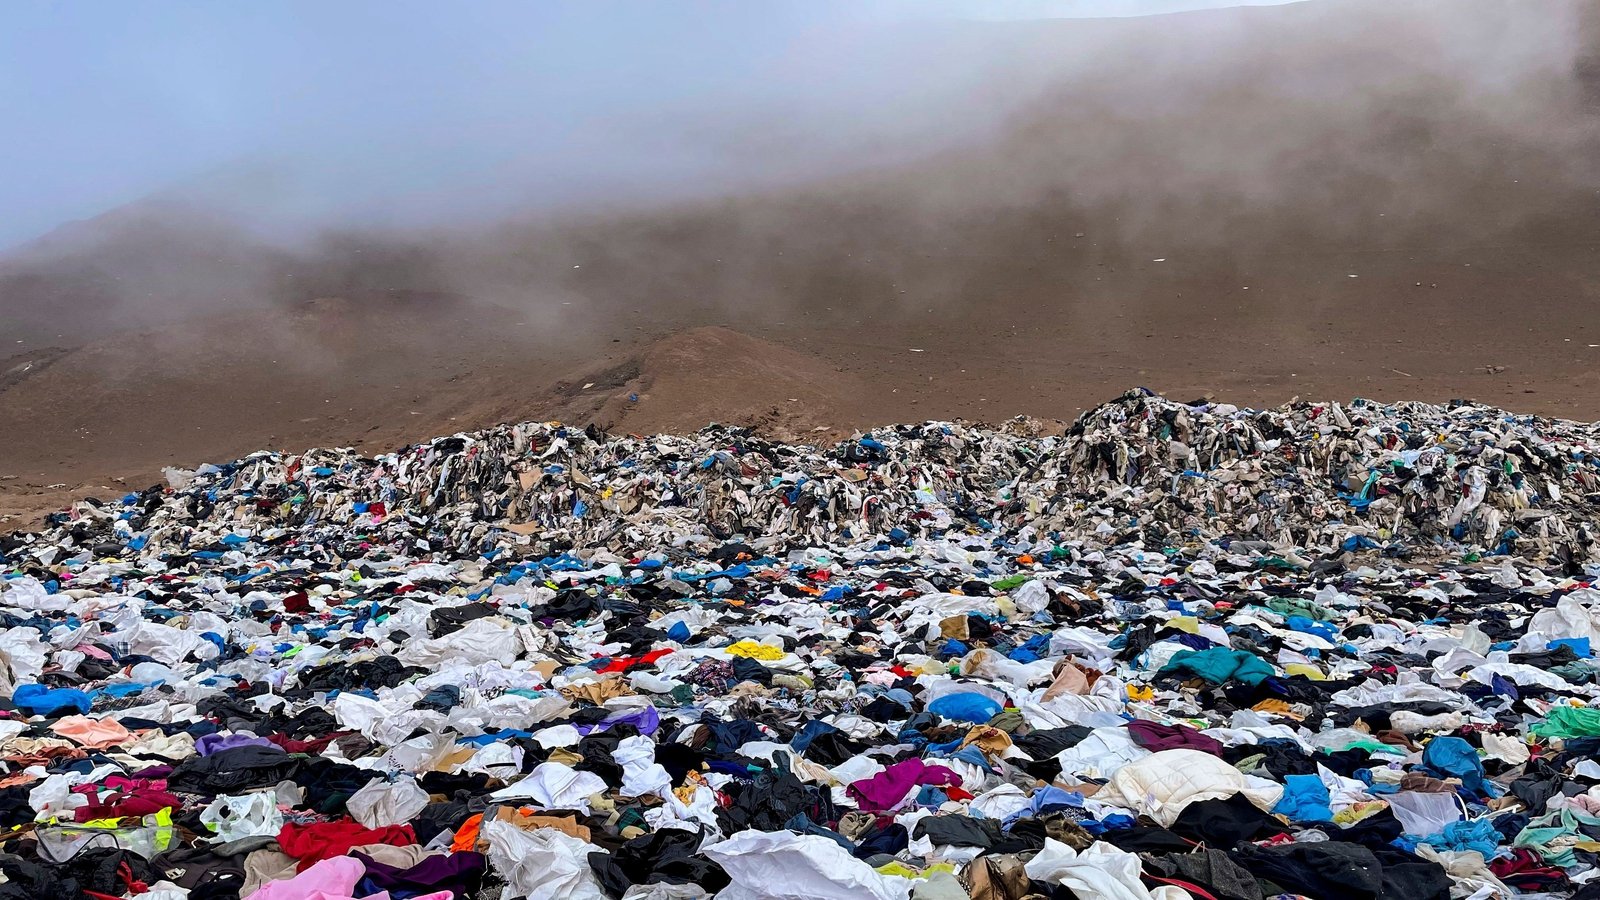 Fast fashion leftovers dumped in Chilean desert